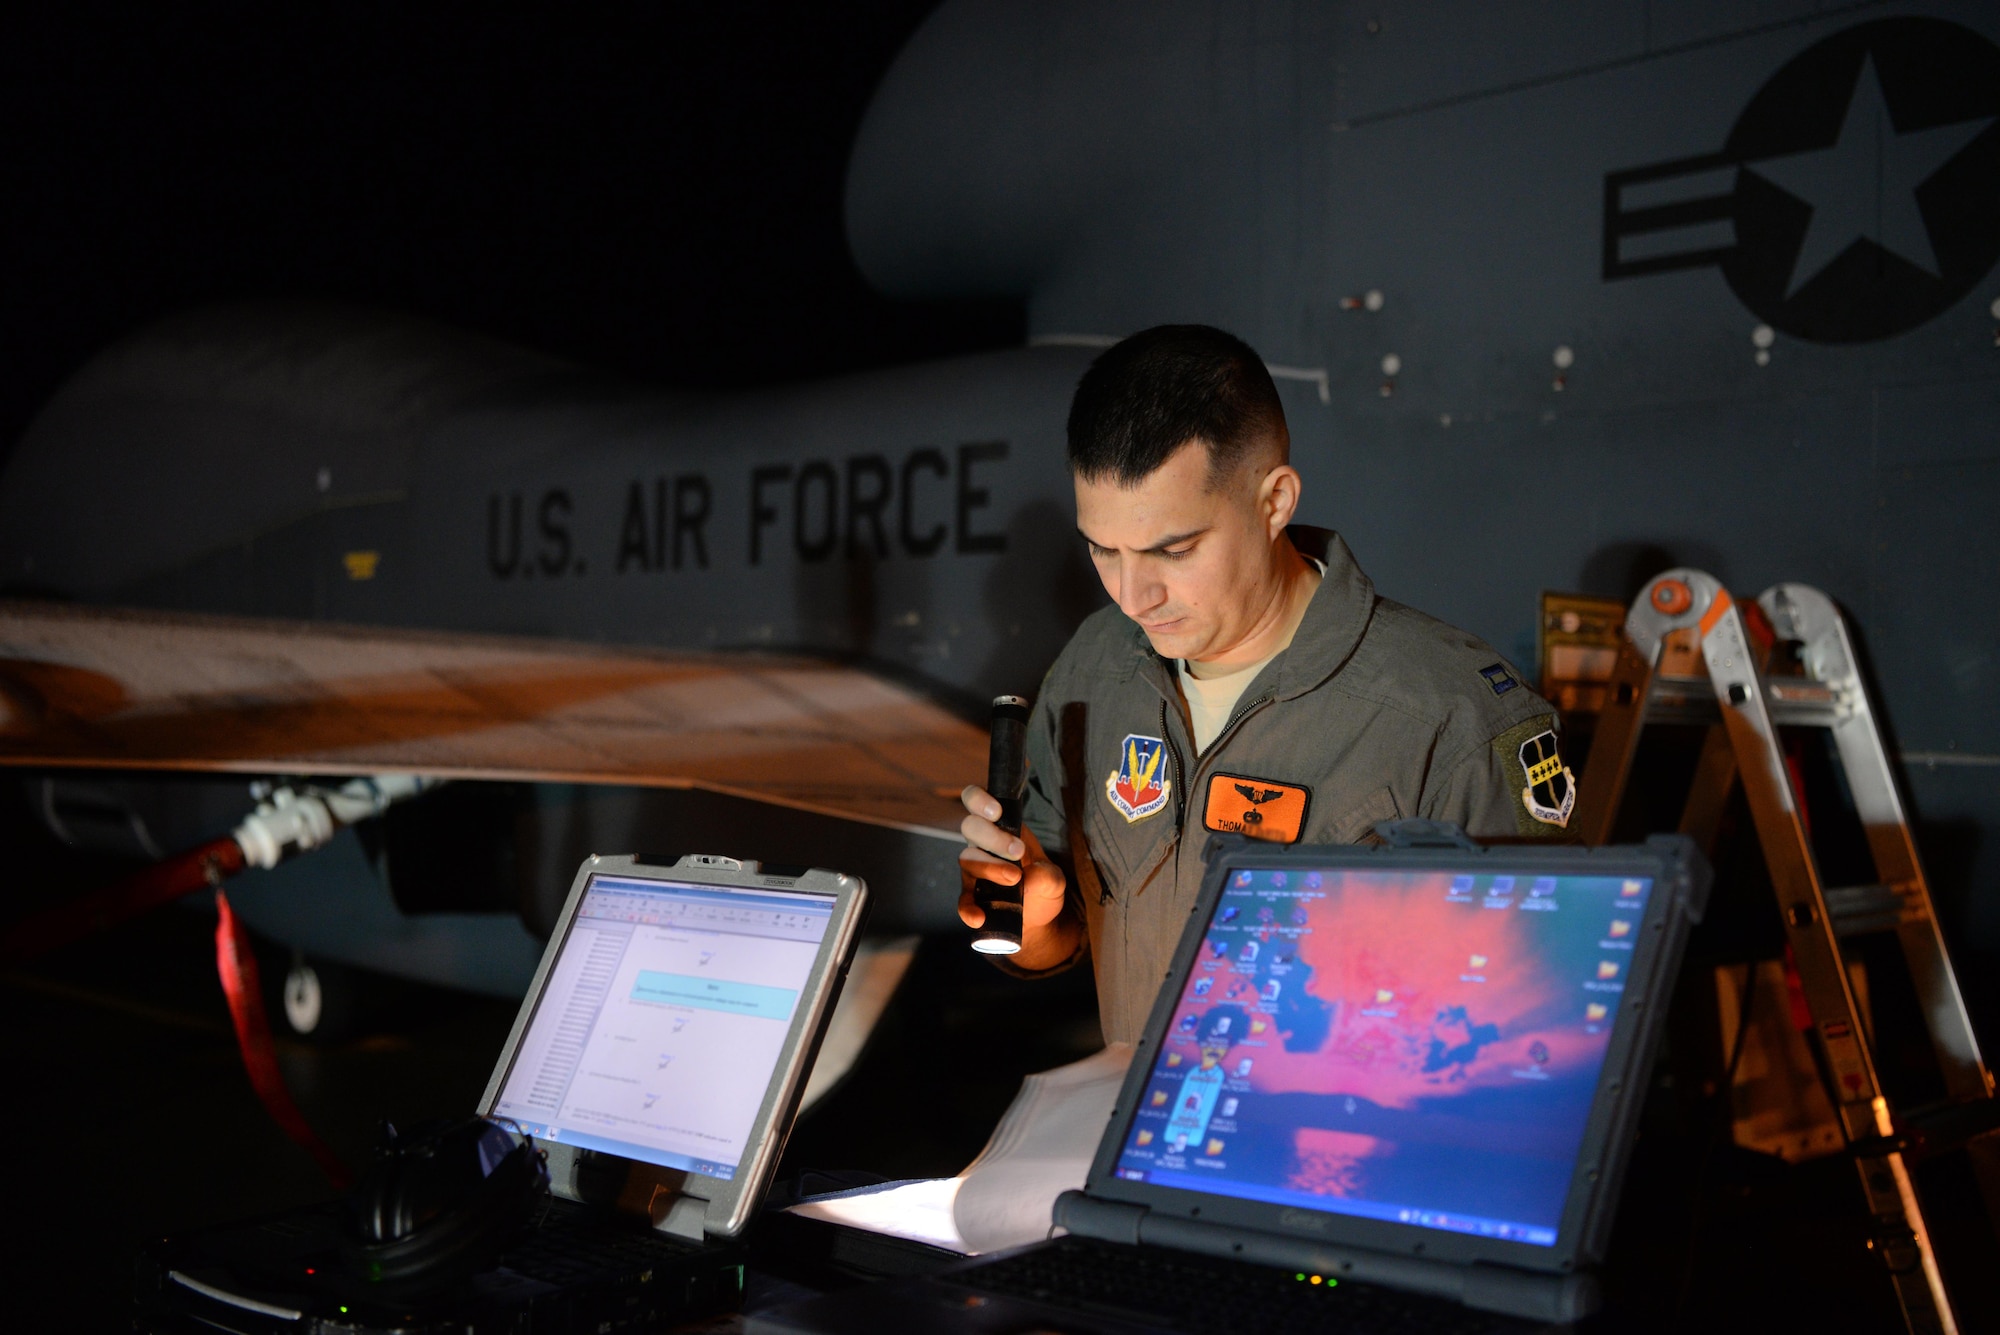 Capt. Thomas, 12th Reconnaissance Squadron RQ-4 Global Hawk pilot, reviews a pre-flight checklist Nov. 1, 2016, at Beale Air Force Base, California. Thomas fulfilled the role of “Hawkeye”. Hawkeye is the call sign for the designated RQ-4 Pilot who performs pre-flight inspections for RQ-4 Global Hawks prior to flight. (U.S. Air Force photo/Staff Sgt. Bobby Cummings)